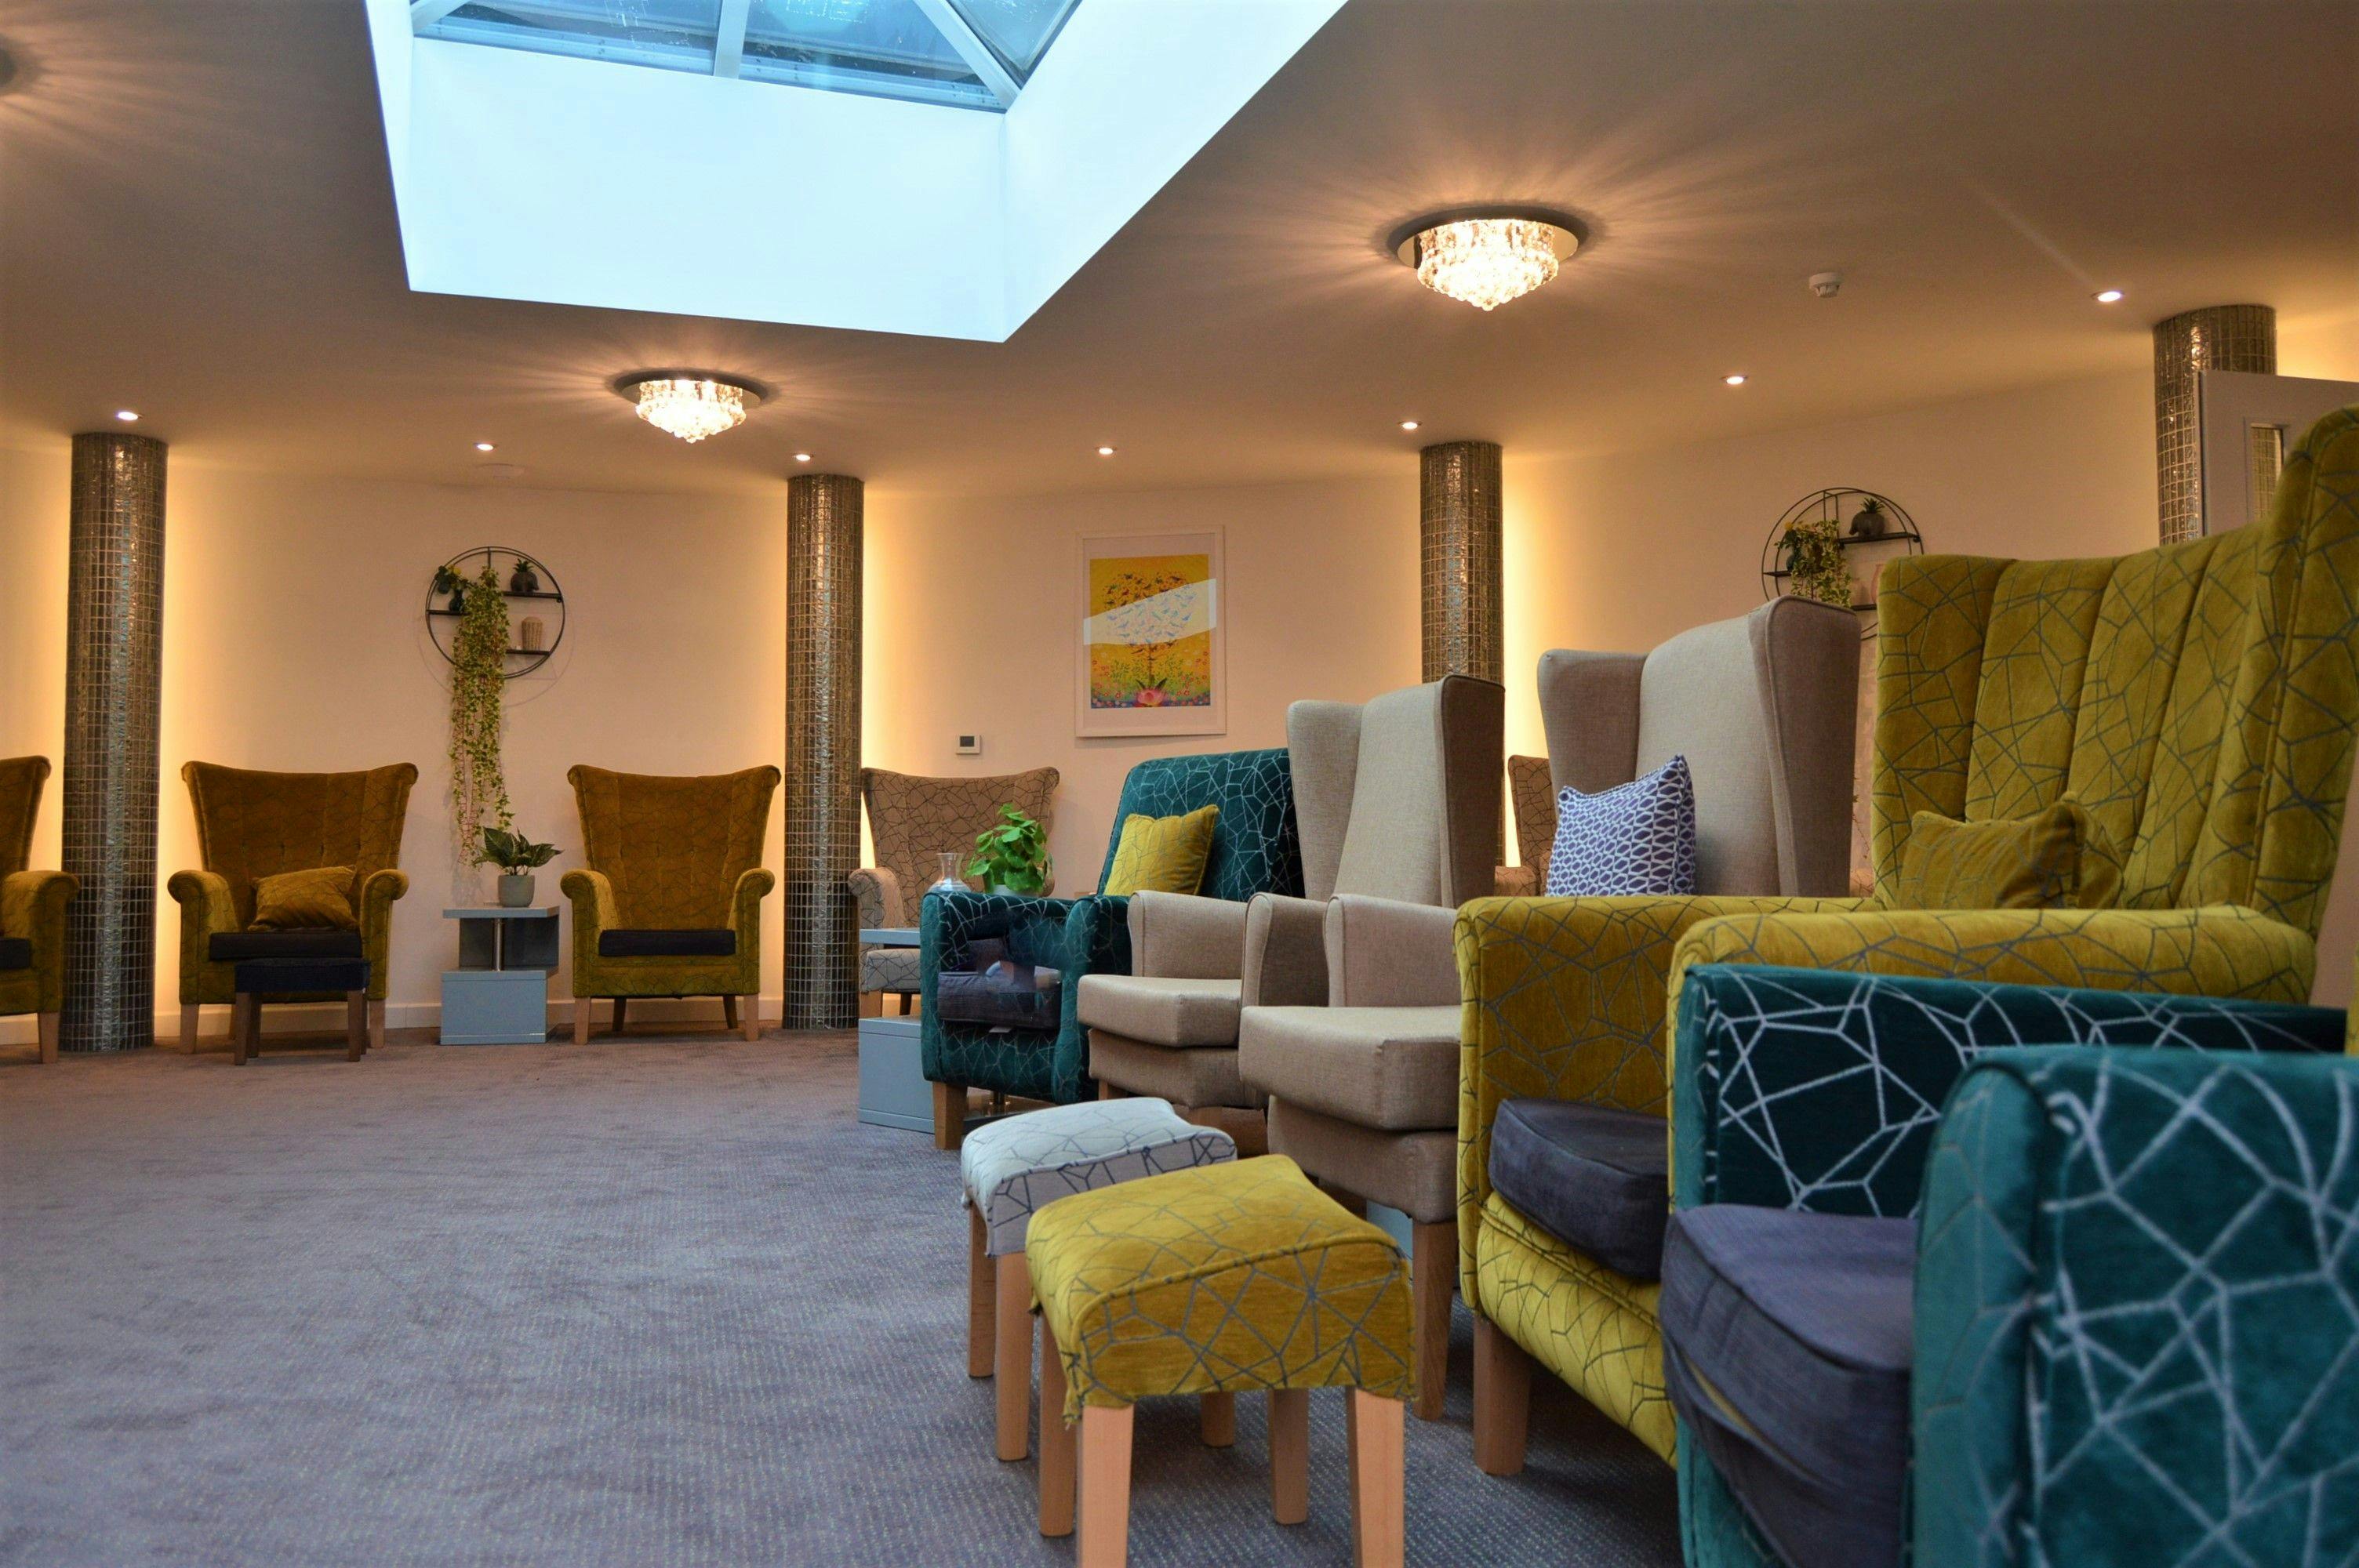 Southwell Court care home